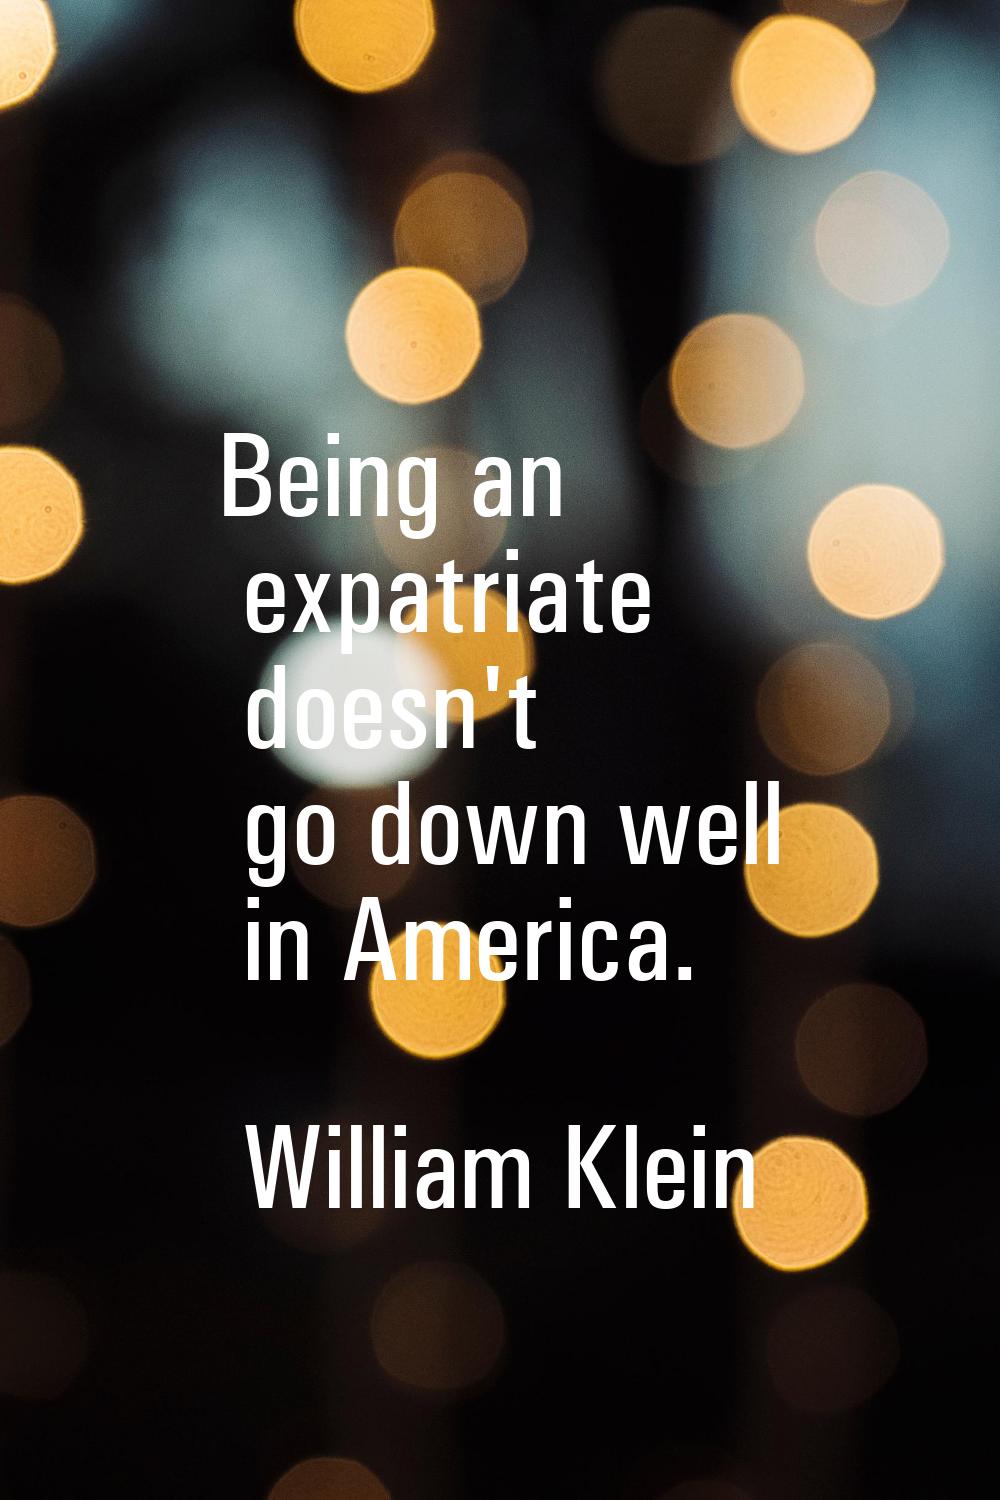 Being an expatriate doesn't go down well in America.